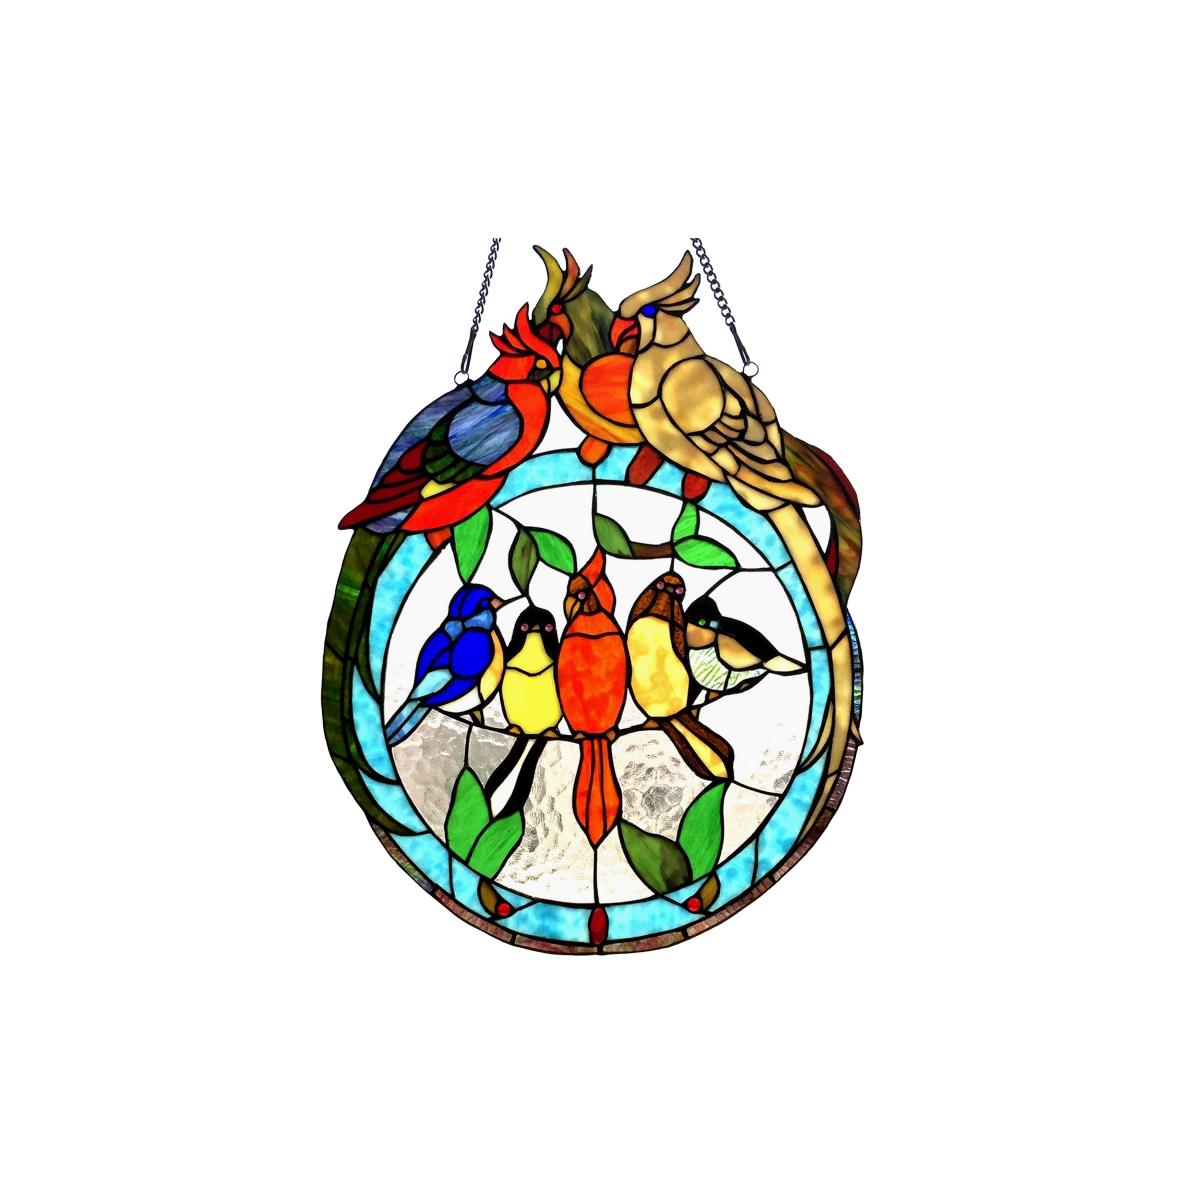 Ch1p986ra19-gpn Songbird Tiffany-glass Featuring Birds Resting On Wire Window Panel - 19 X 25 In.